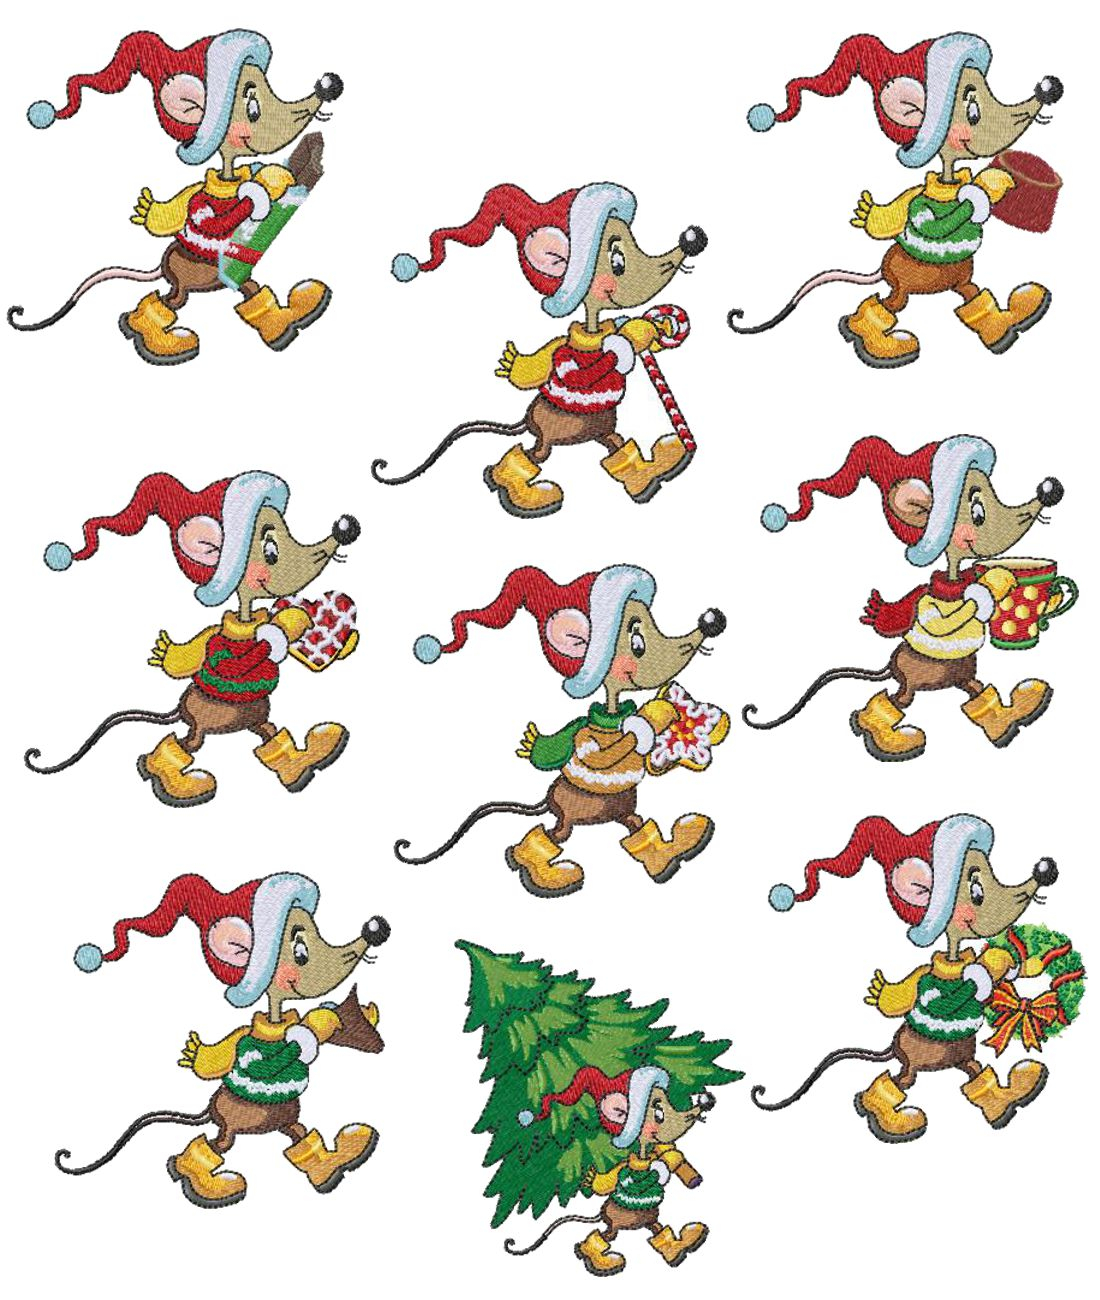 Embroidery Patterns Christmas Christmas Mouse Carmellas Korner Ckc 385 1500 Embroidery